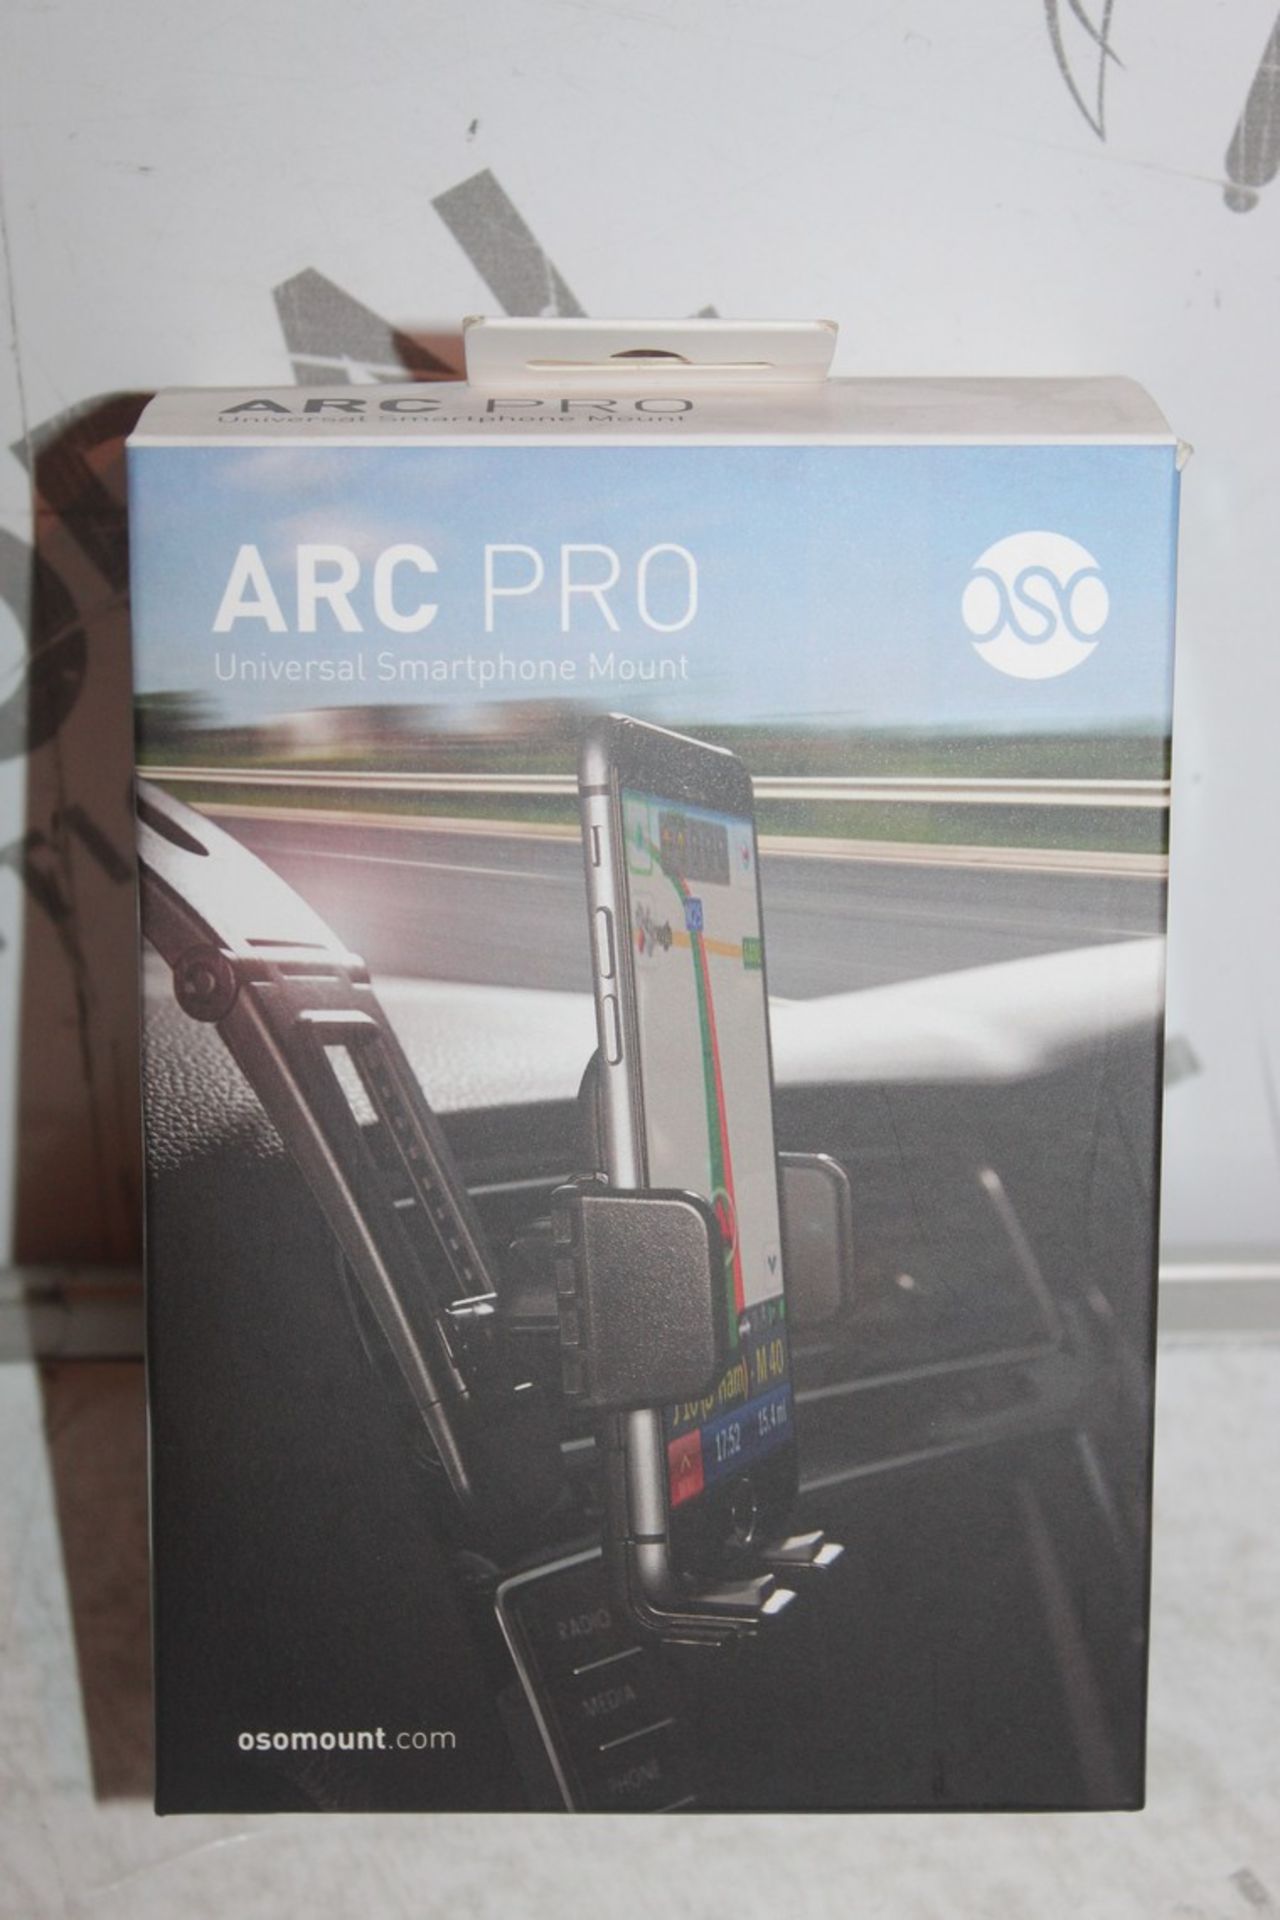 Lot to Contain 4 Brand New Asa Arch Pro Universal Smart Phone Stands Combined RRP £100